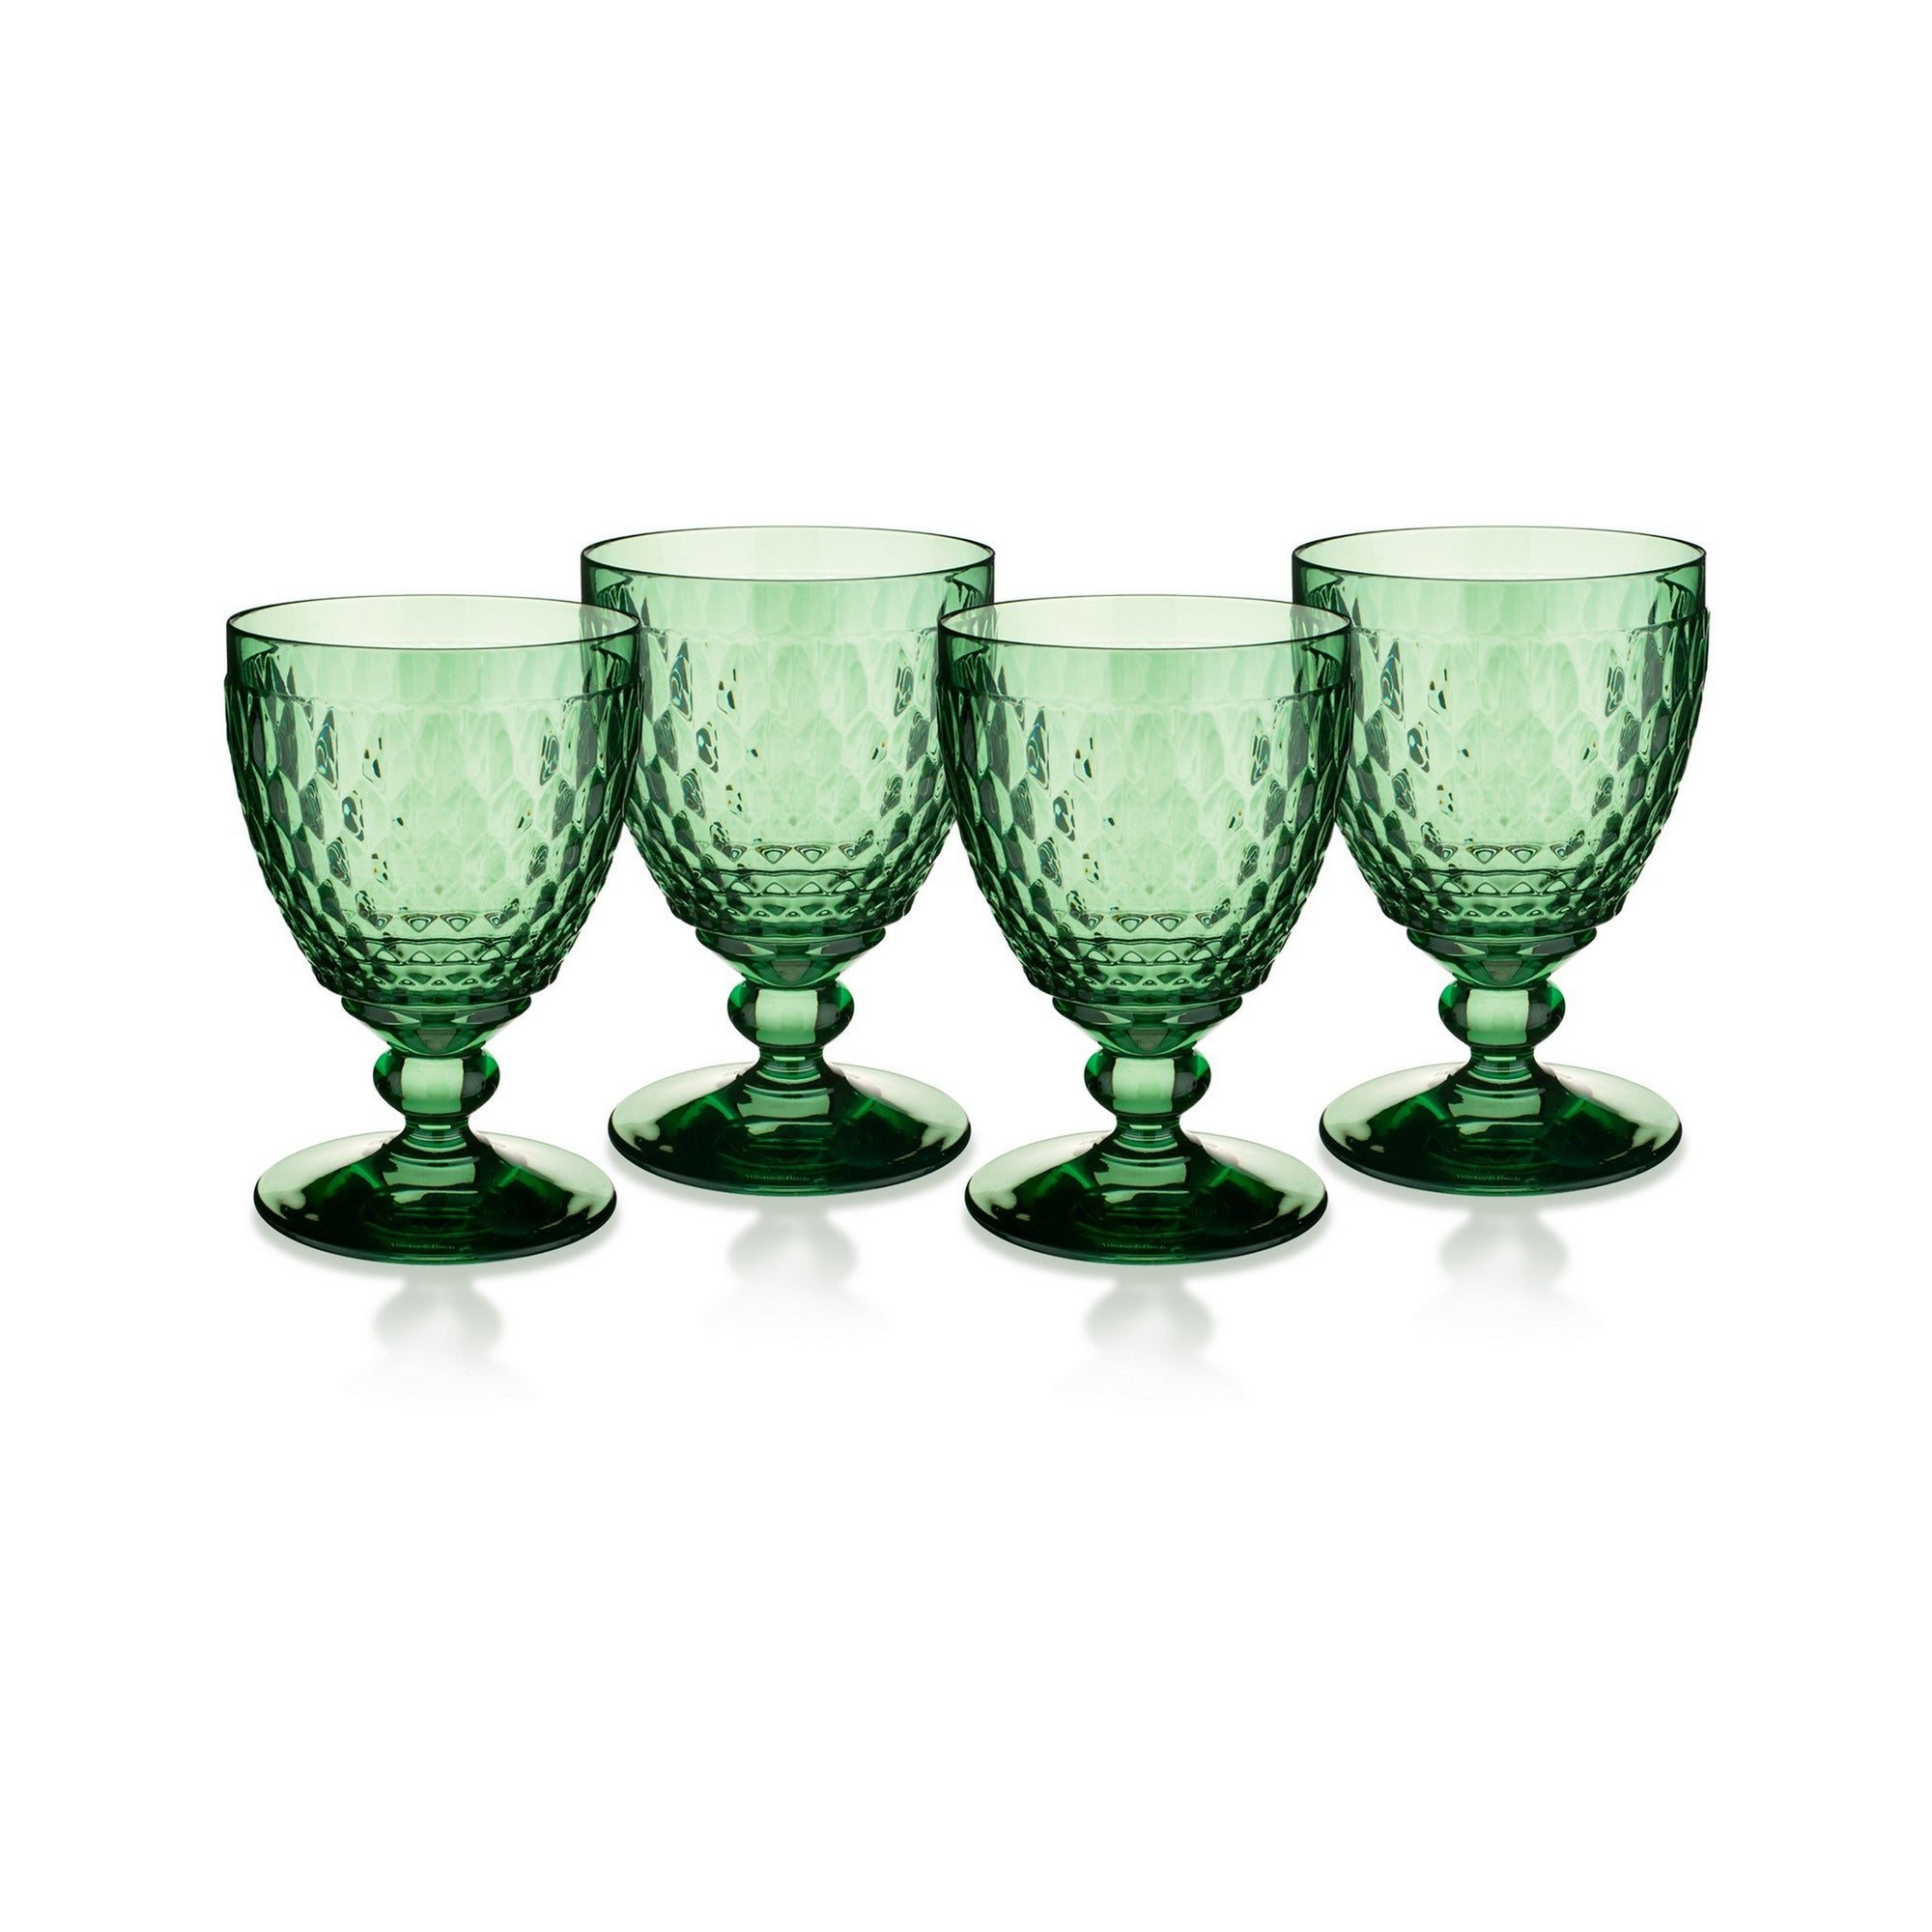 Villeroy & Boch Boston Colored Red,  Wine Glasses, Set of 4,  Green, 11 oz